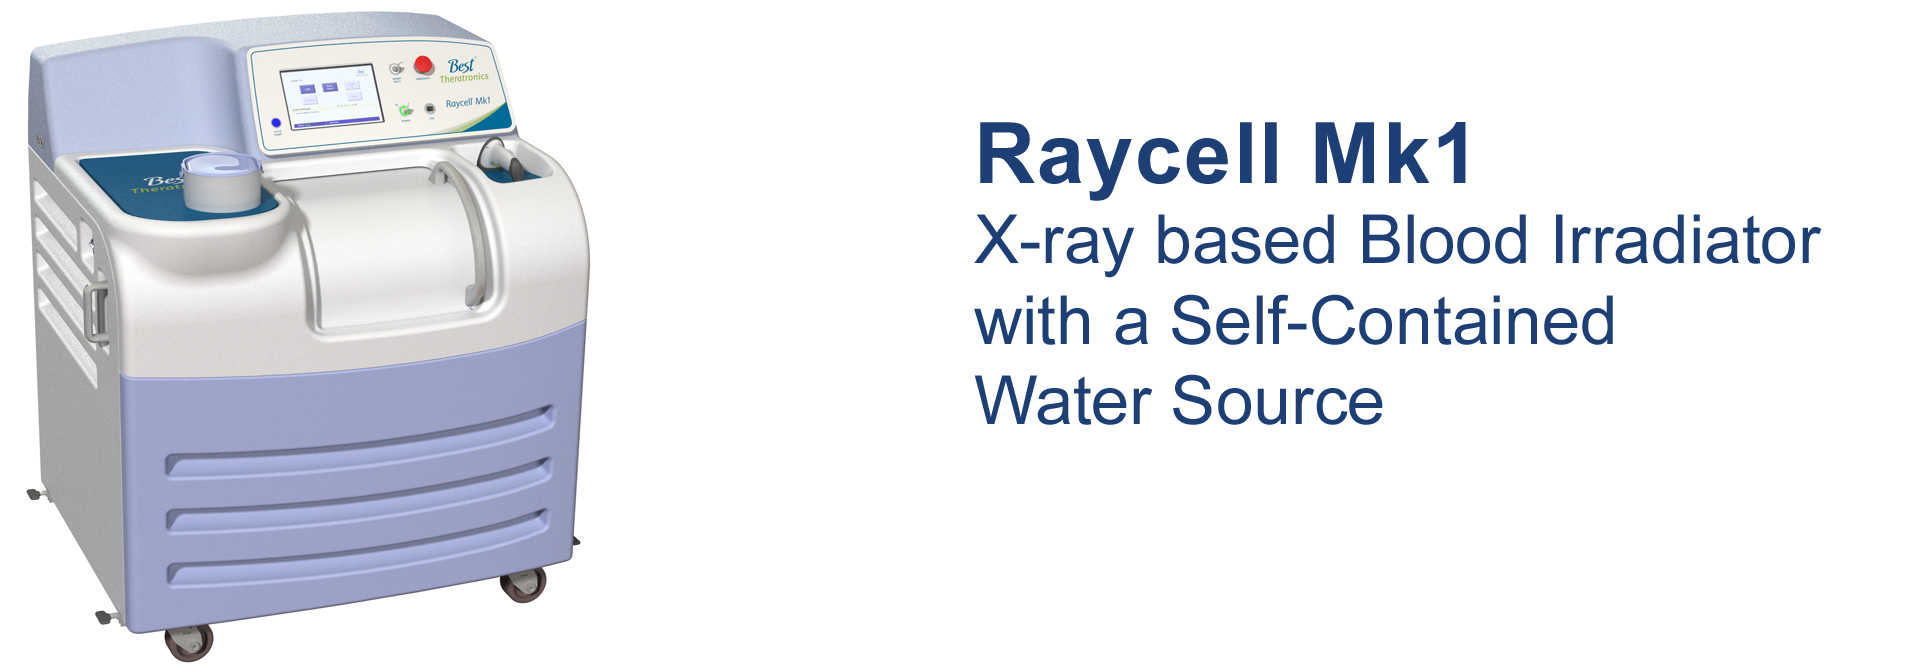 Raycell Mk1: X-Ray Based Blood Irradiator w/ Self-Contained Water Source